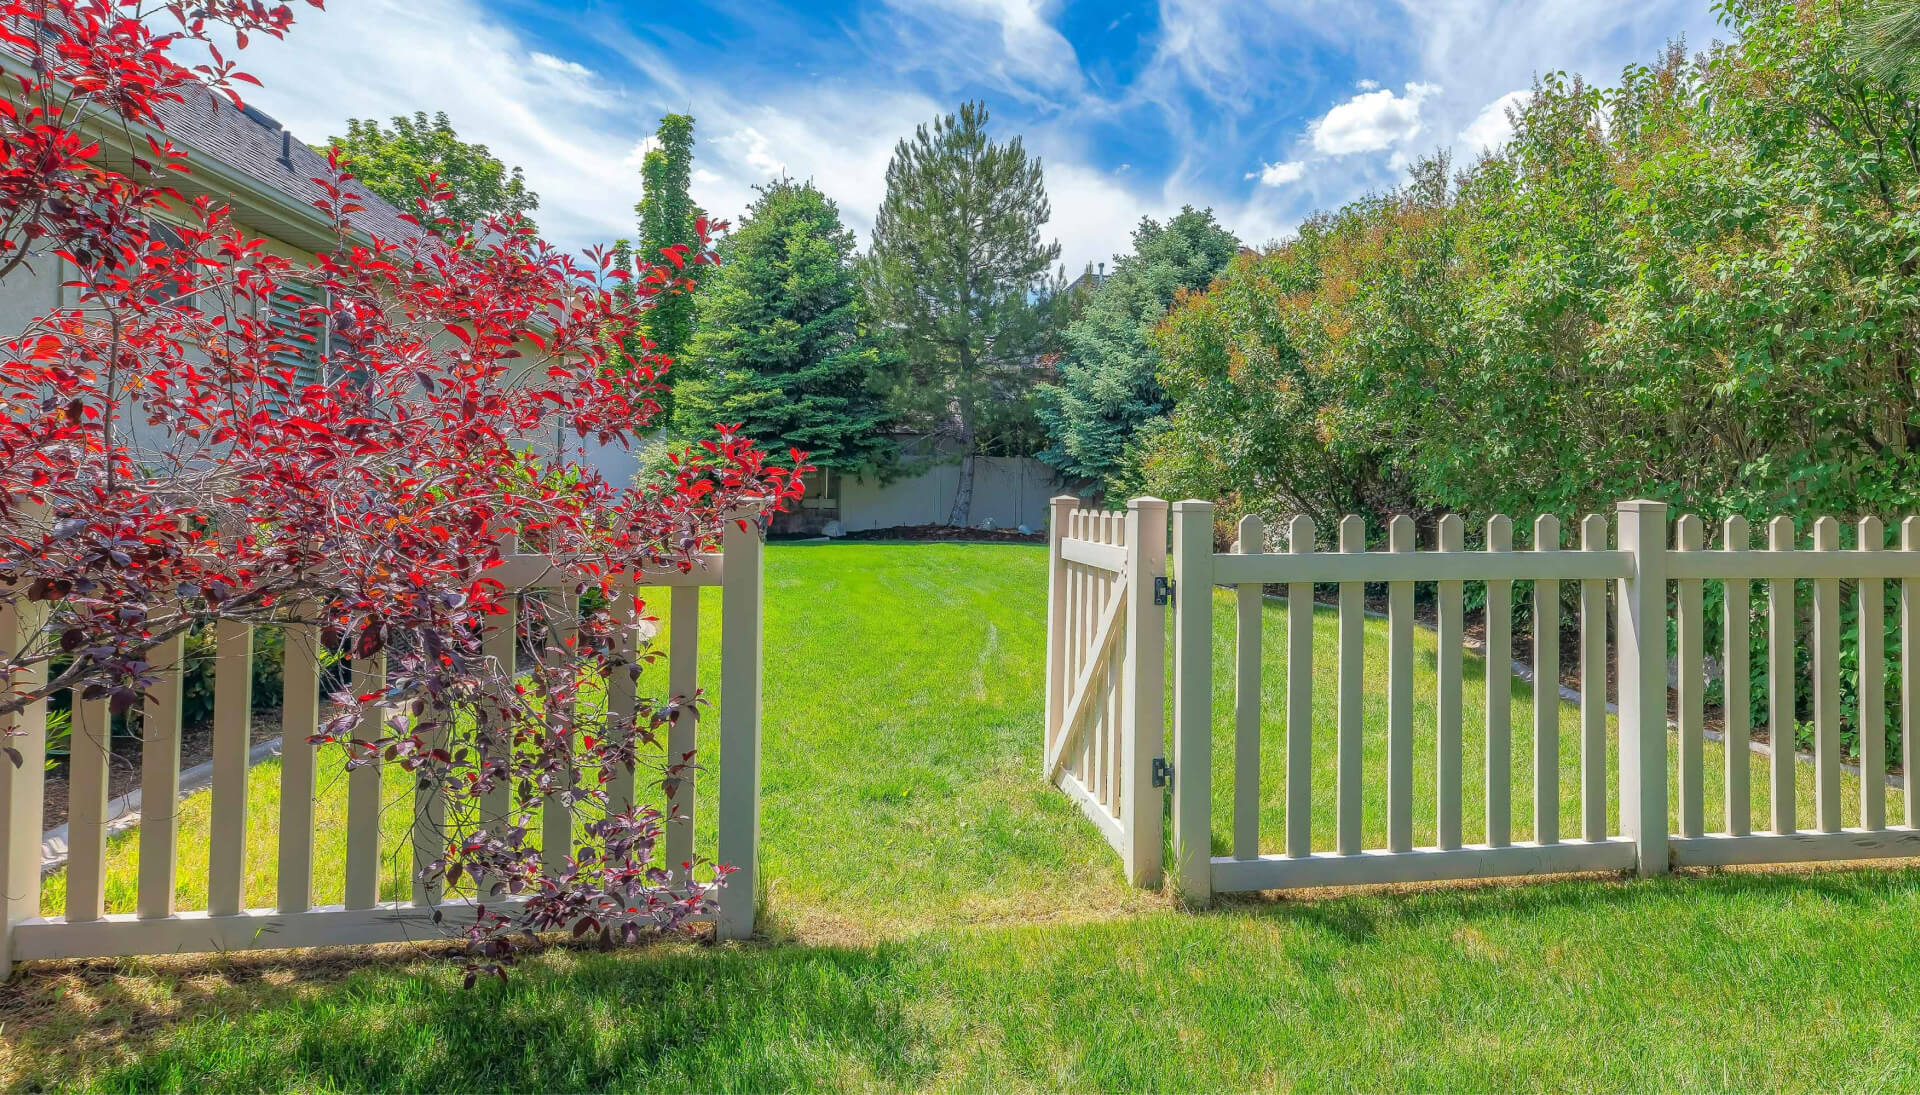 A functional fence gate providing access to a well-maintained backyard, surrounded by a wooden fence in San Antonio